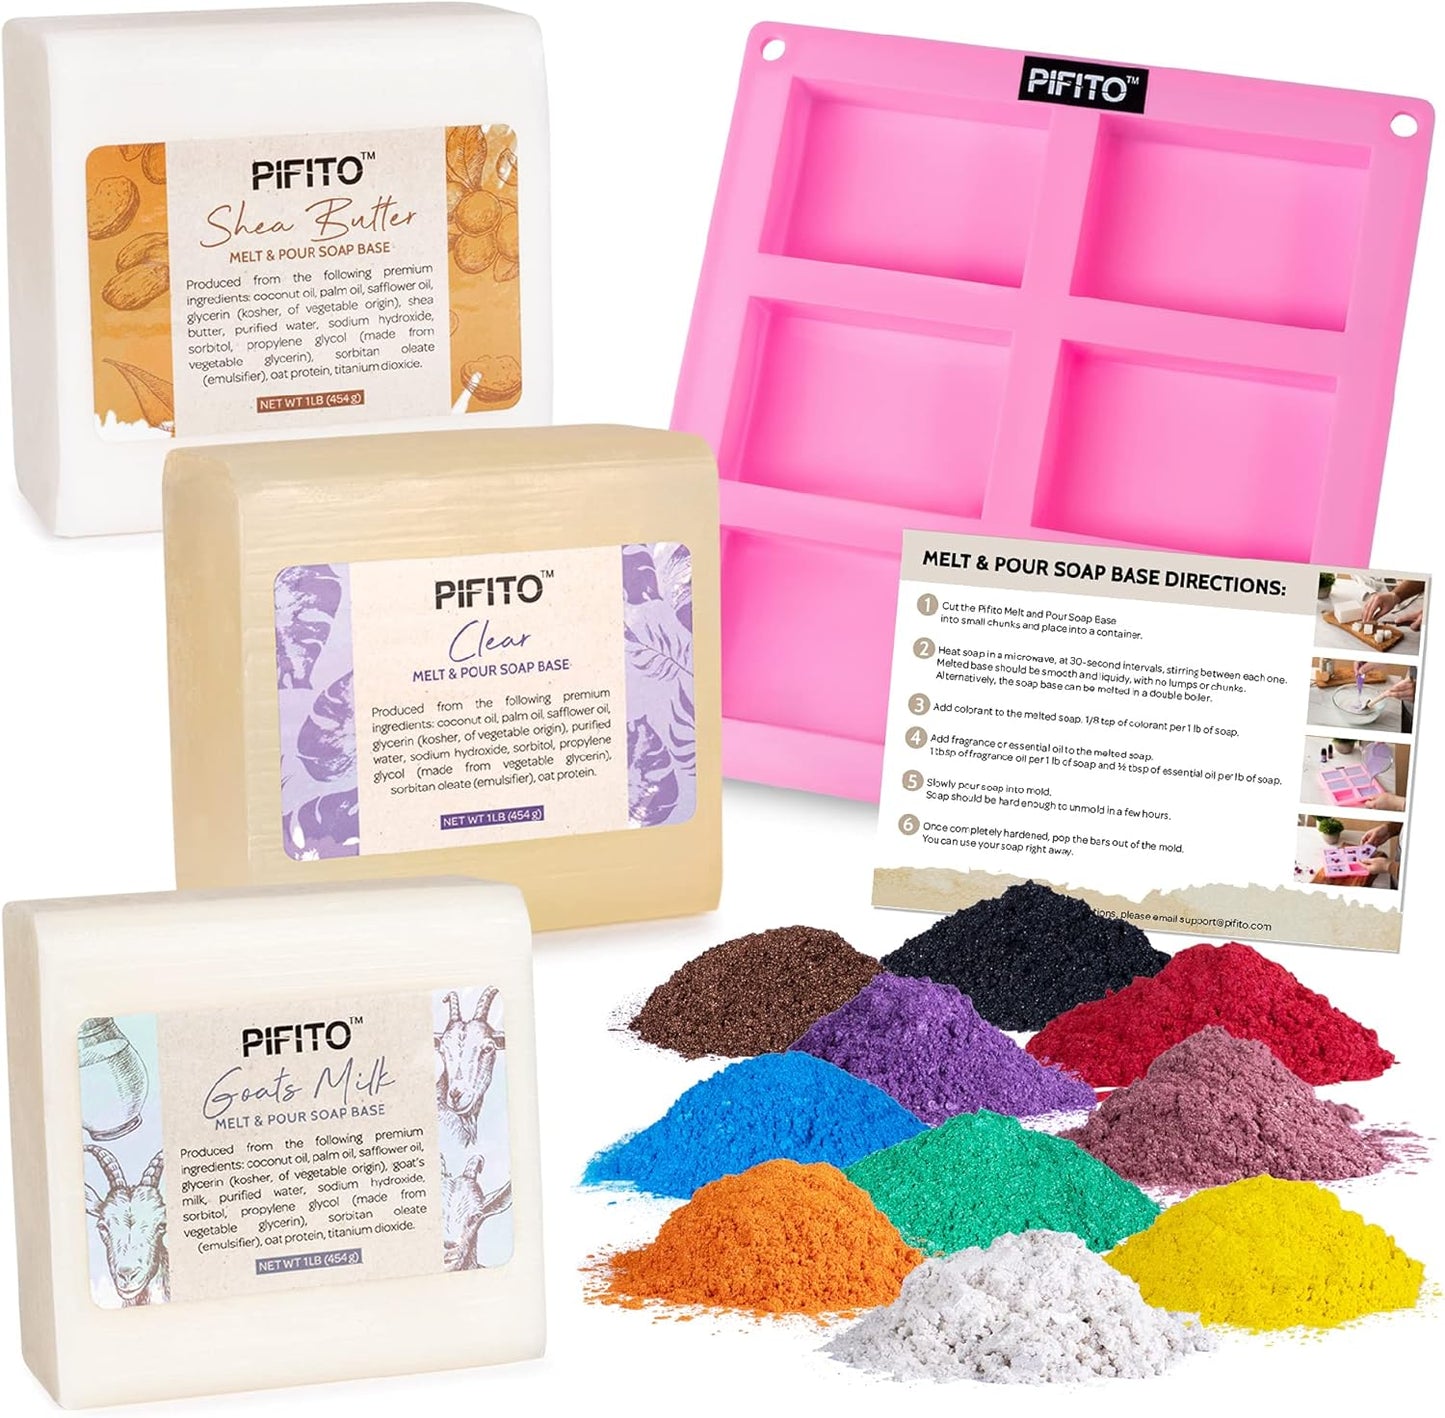 Soap Making Kit │ DIY Soap Making Supplies - 3 Lbs Melt and Pour Soap Base (Goats Milk, Shea Butter, Clear), 10-Pack Mica "Original" Colorants Sampler, Mold and Instructions